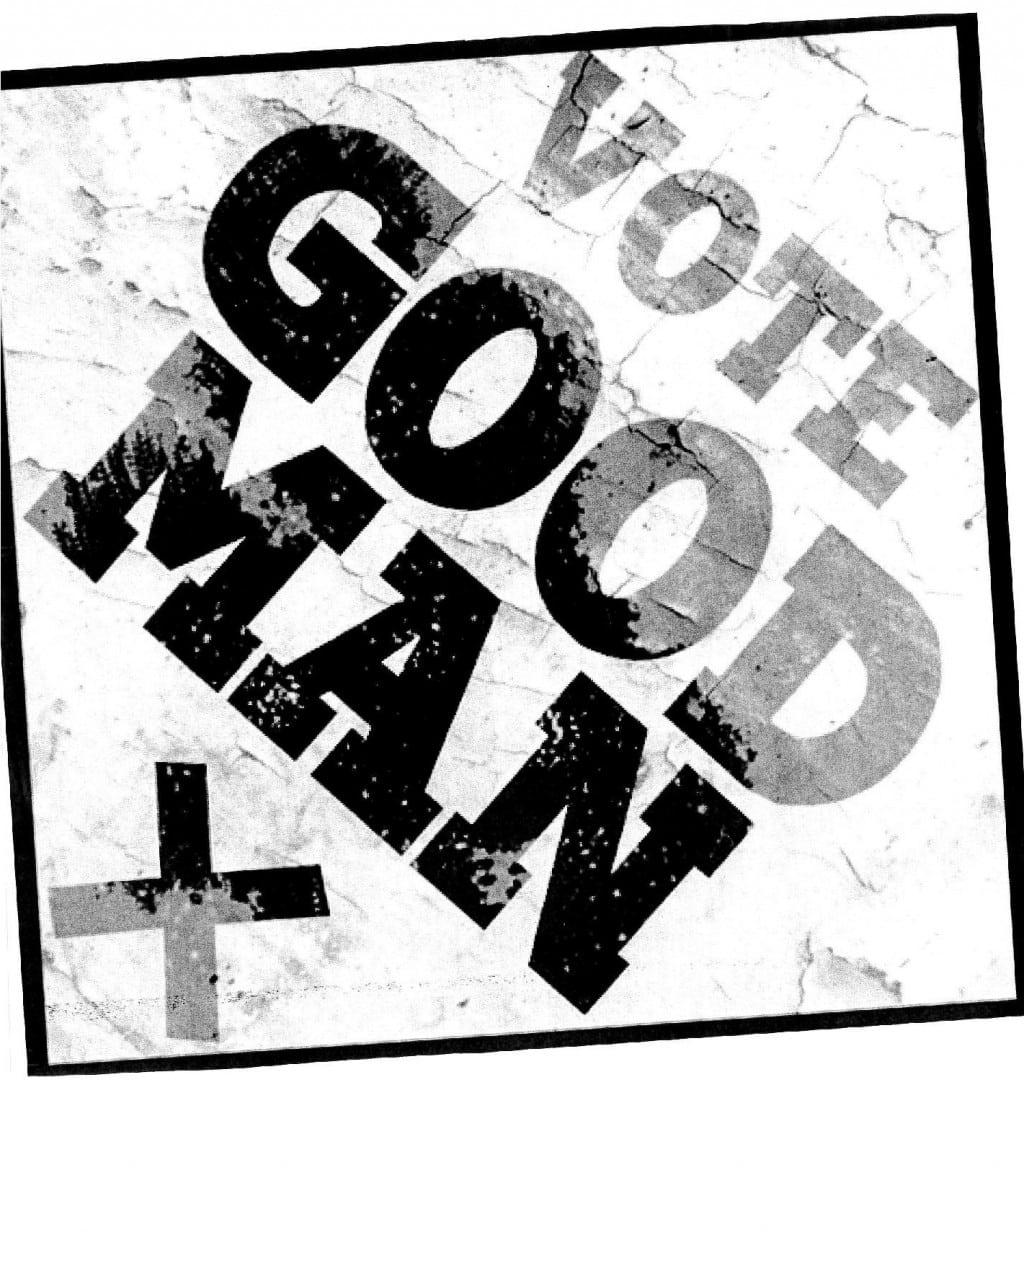 Fly poster for Dead Dog in a Suitcase. Features the black outline of a square on a white background. Inside the square are the words 'Vote Goodman' split across three lines, with a black X under the last line. The lettering is faded in places. The background appears crumpled like paper, or possibly an old, flaking concrete wall. The square and wording is tilted at an angle, and appears to be slightly cropped in the top left and bottom right corner as part of the corners are missing.